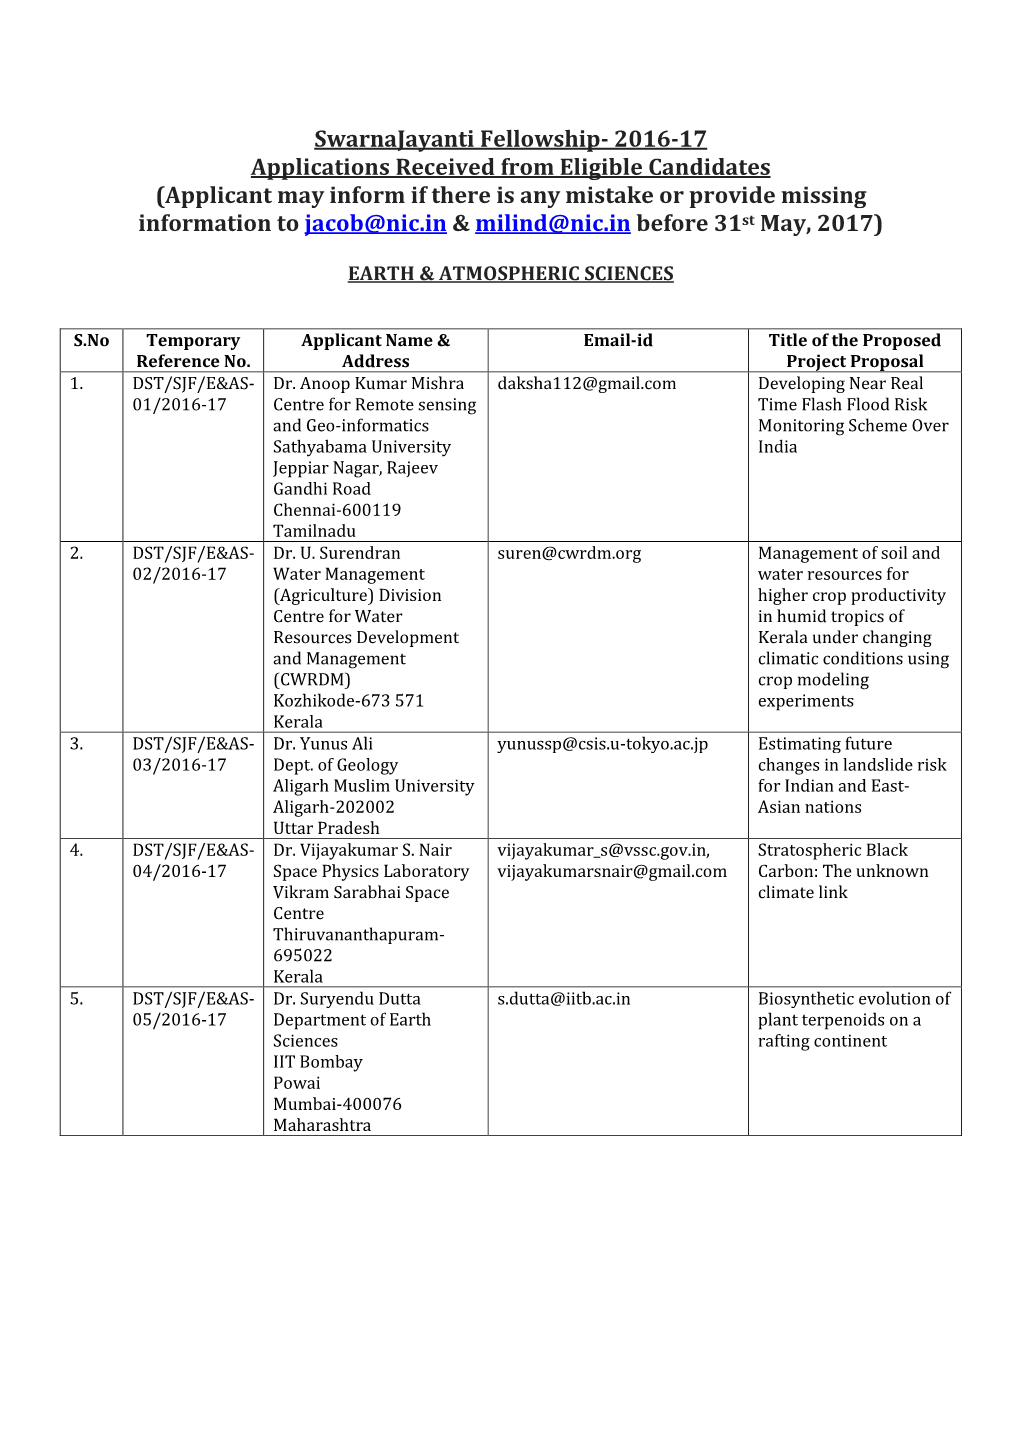 Swarnajayanti Fellowship- 2016-17 Applications Received from Eligible Candidates